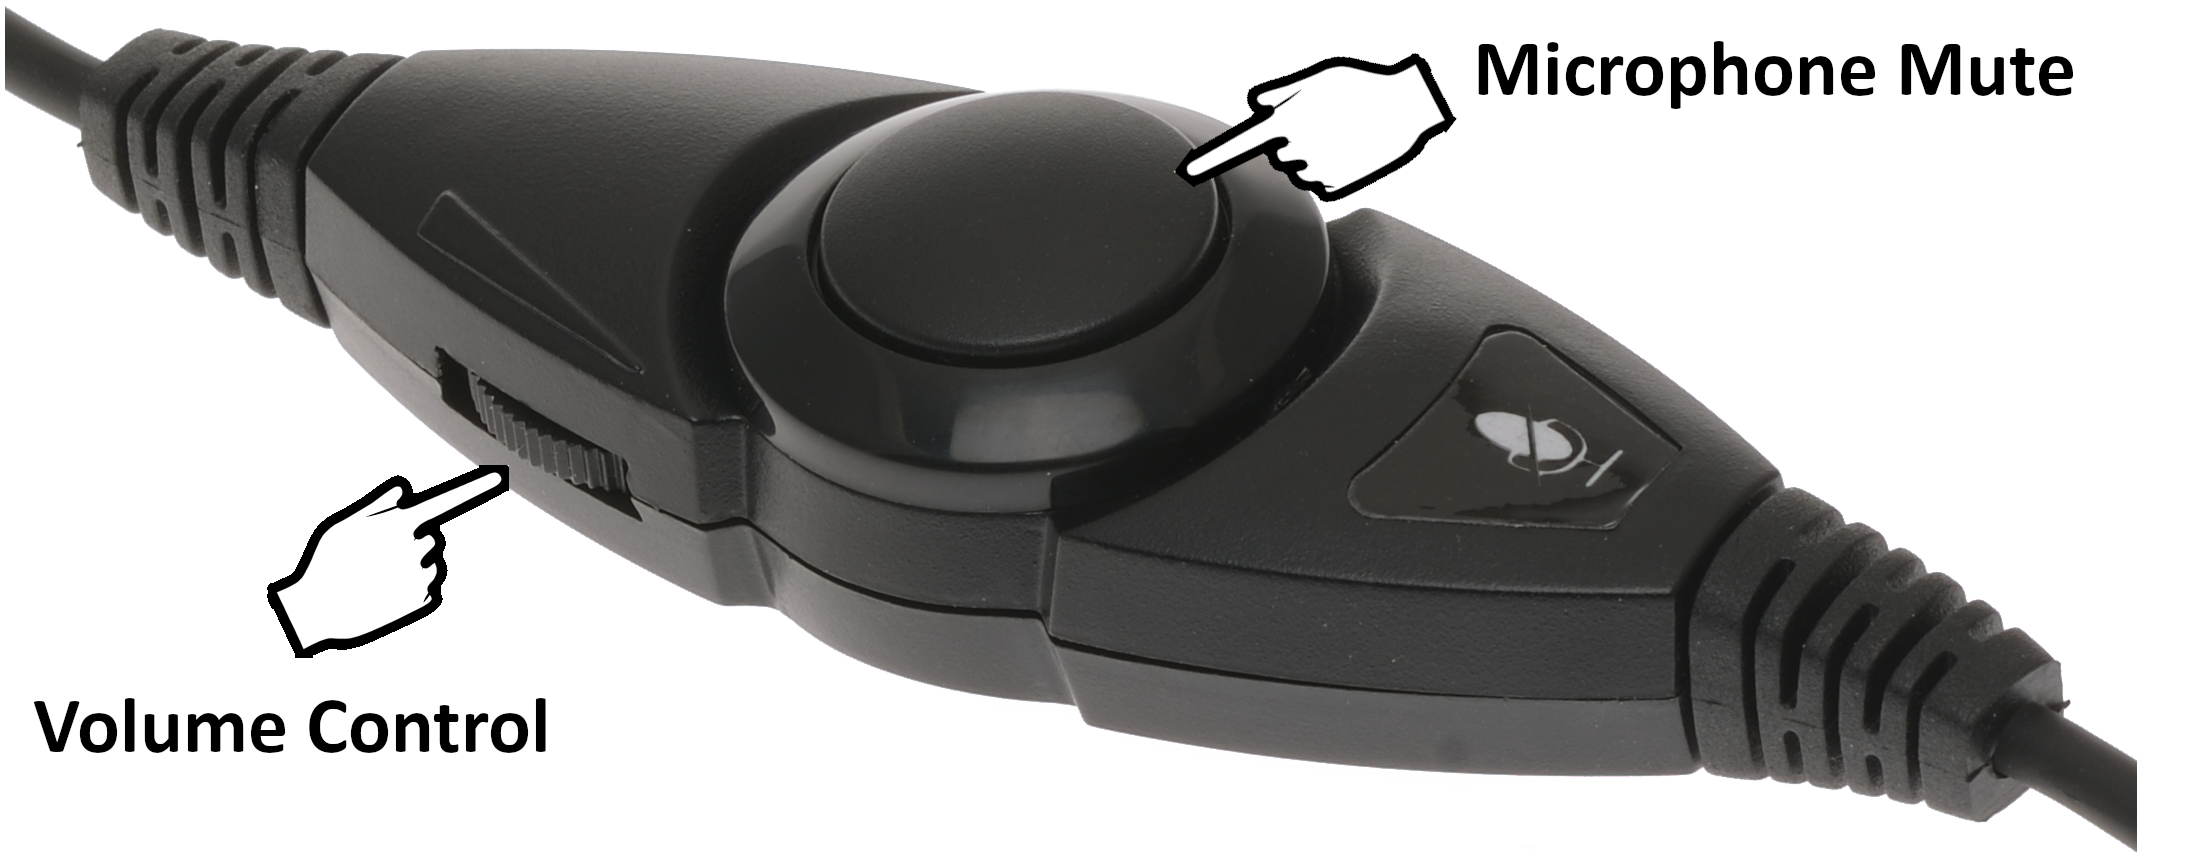 OvisLink headset volume control and mute quick disconnect function